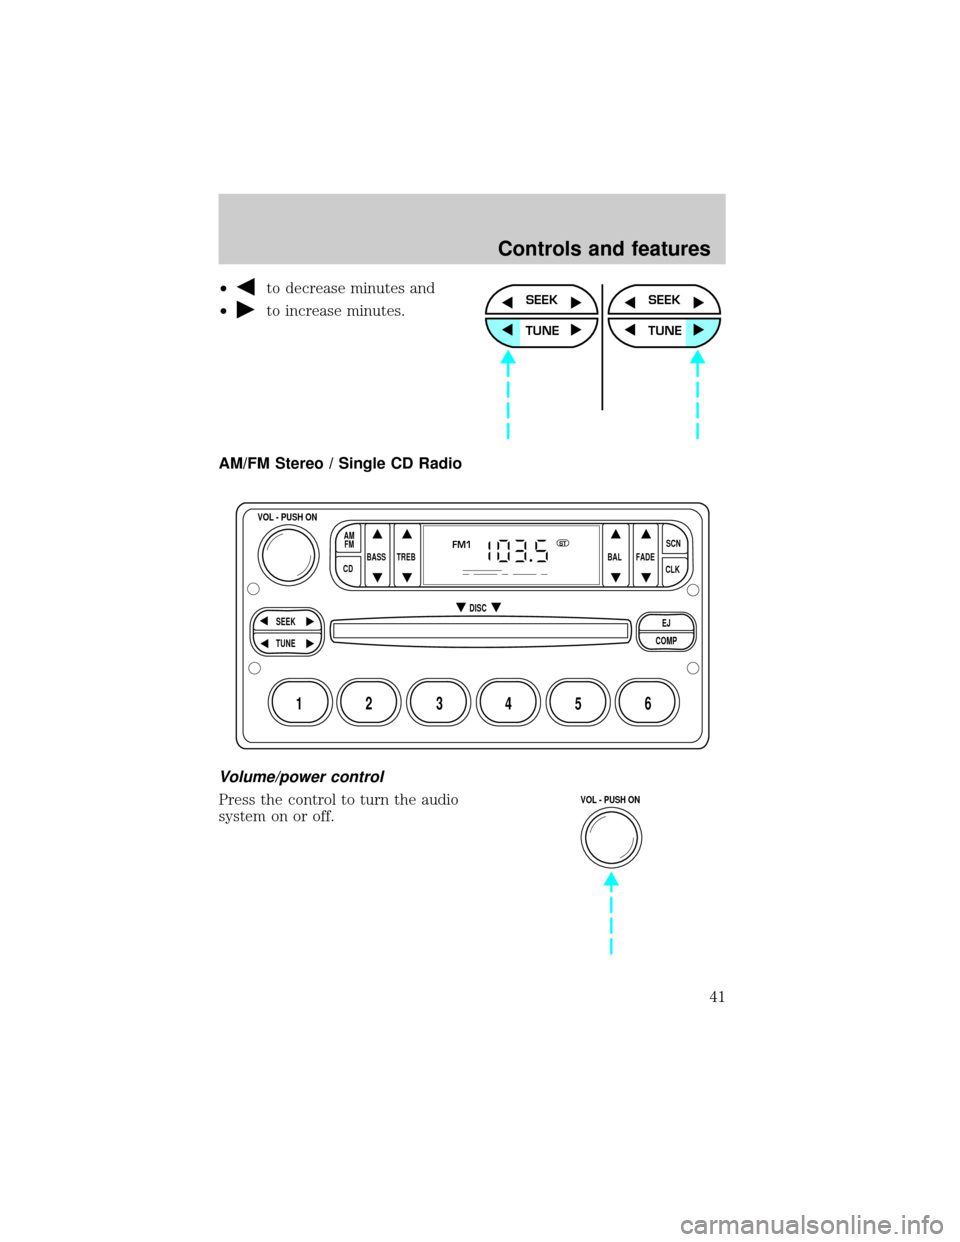 Mercury Mountaineer 1999  Owners Manuals ²to decrease minutes and
²
to increase minutes.
AM/FM Stereo / Single CD Radio
Volume/power control
Press the control to turn the audio
system on or off.
SEEK
TUNE
SEEK
TUNE
BASS
CDTREB BAL FADESCN
